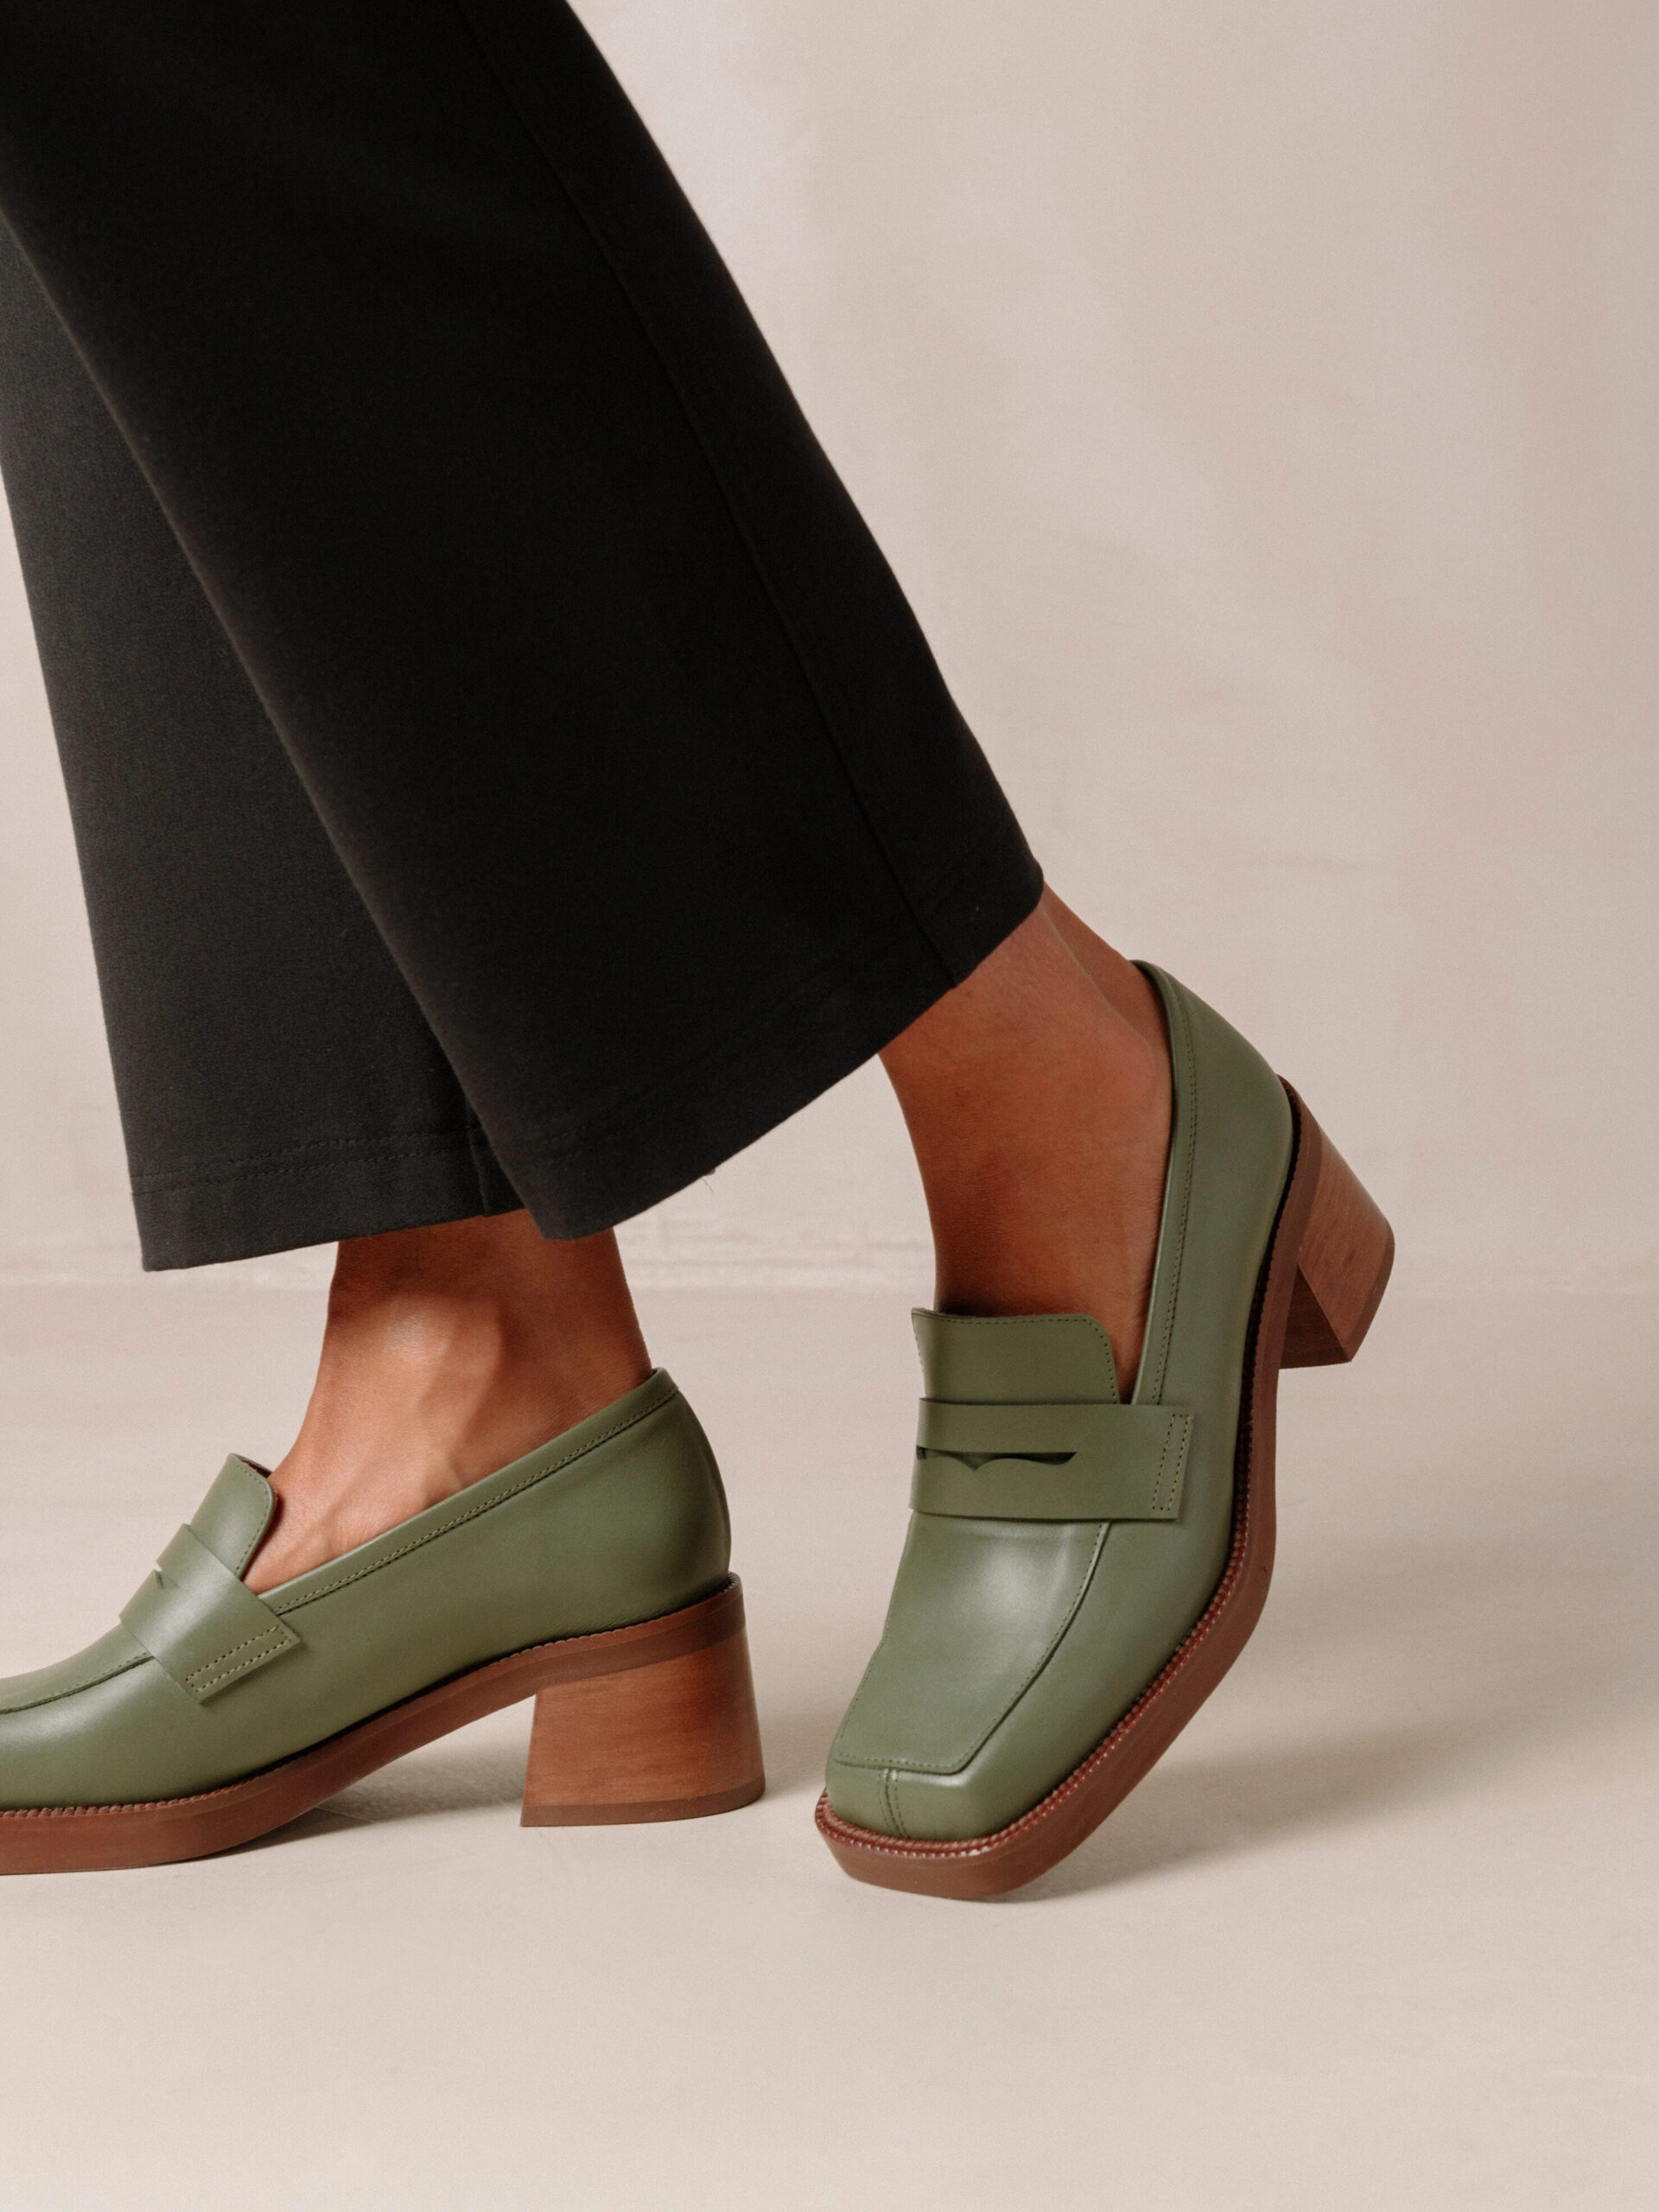 These Sustainable Footwear Brands Will Change The Way You Wear